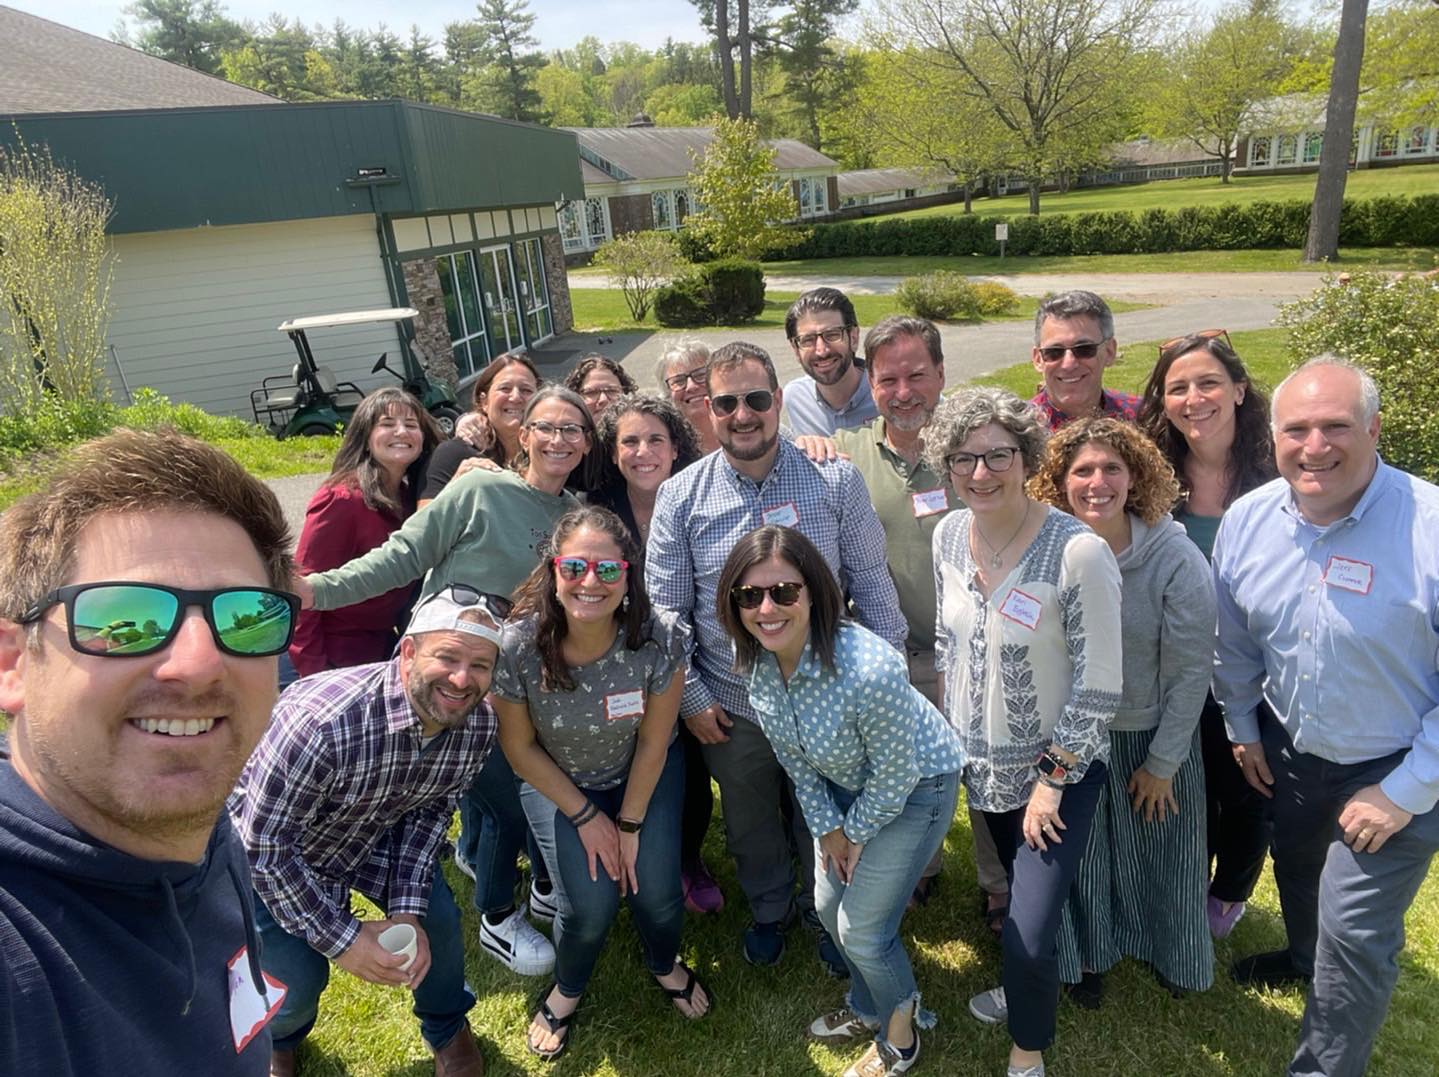 What a great day in the Berkshires with some of our amazing faculty members!! We are so lucky to be able to learn from and with such a fun and caring group of Rabbis, Cantors, and Educators during the summer!